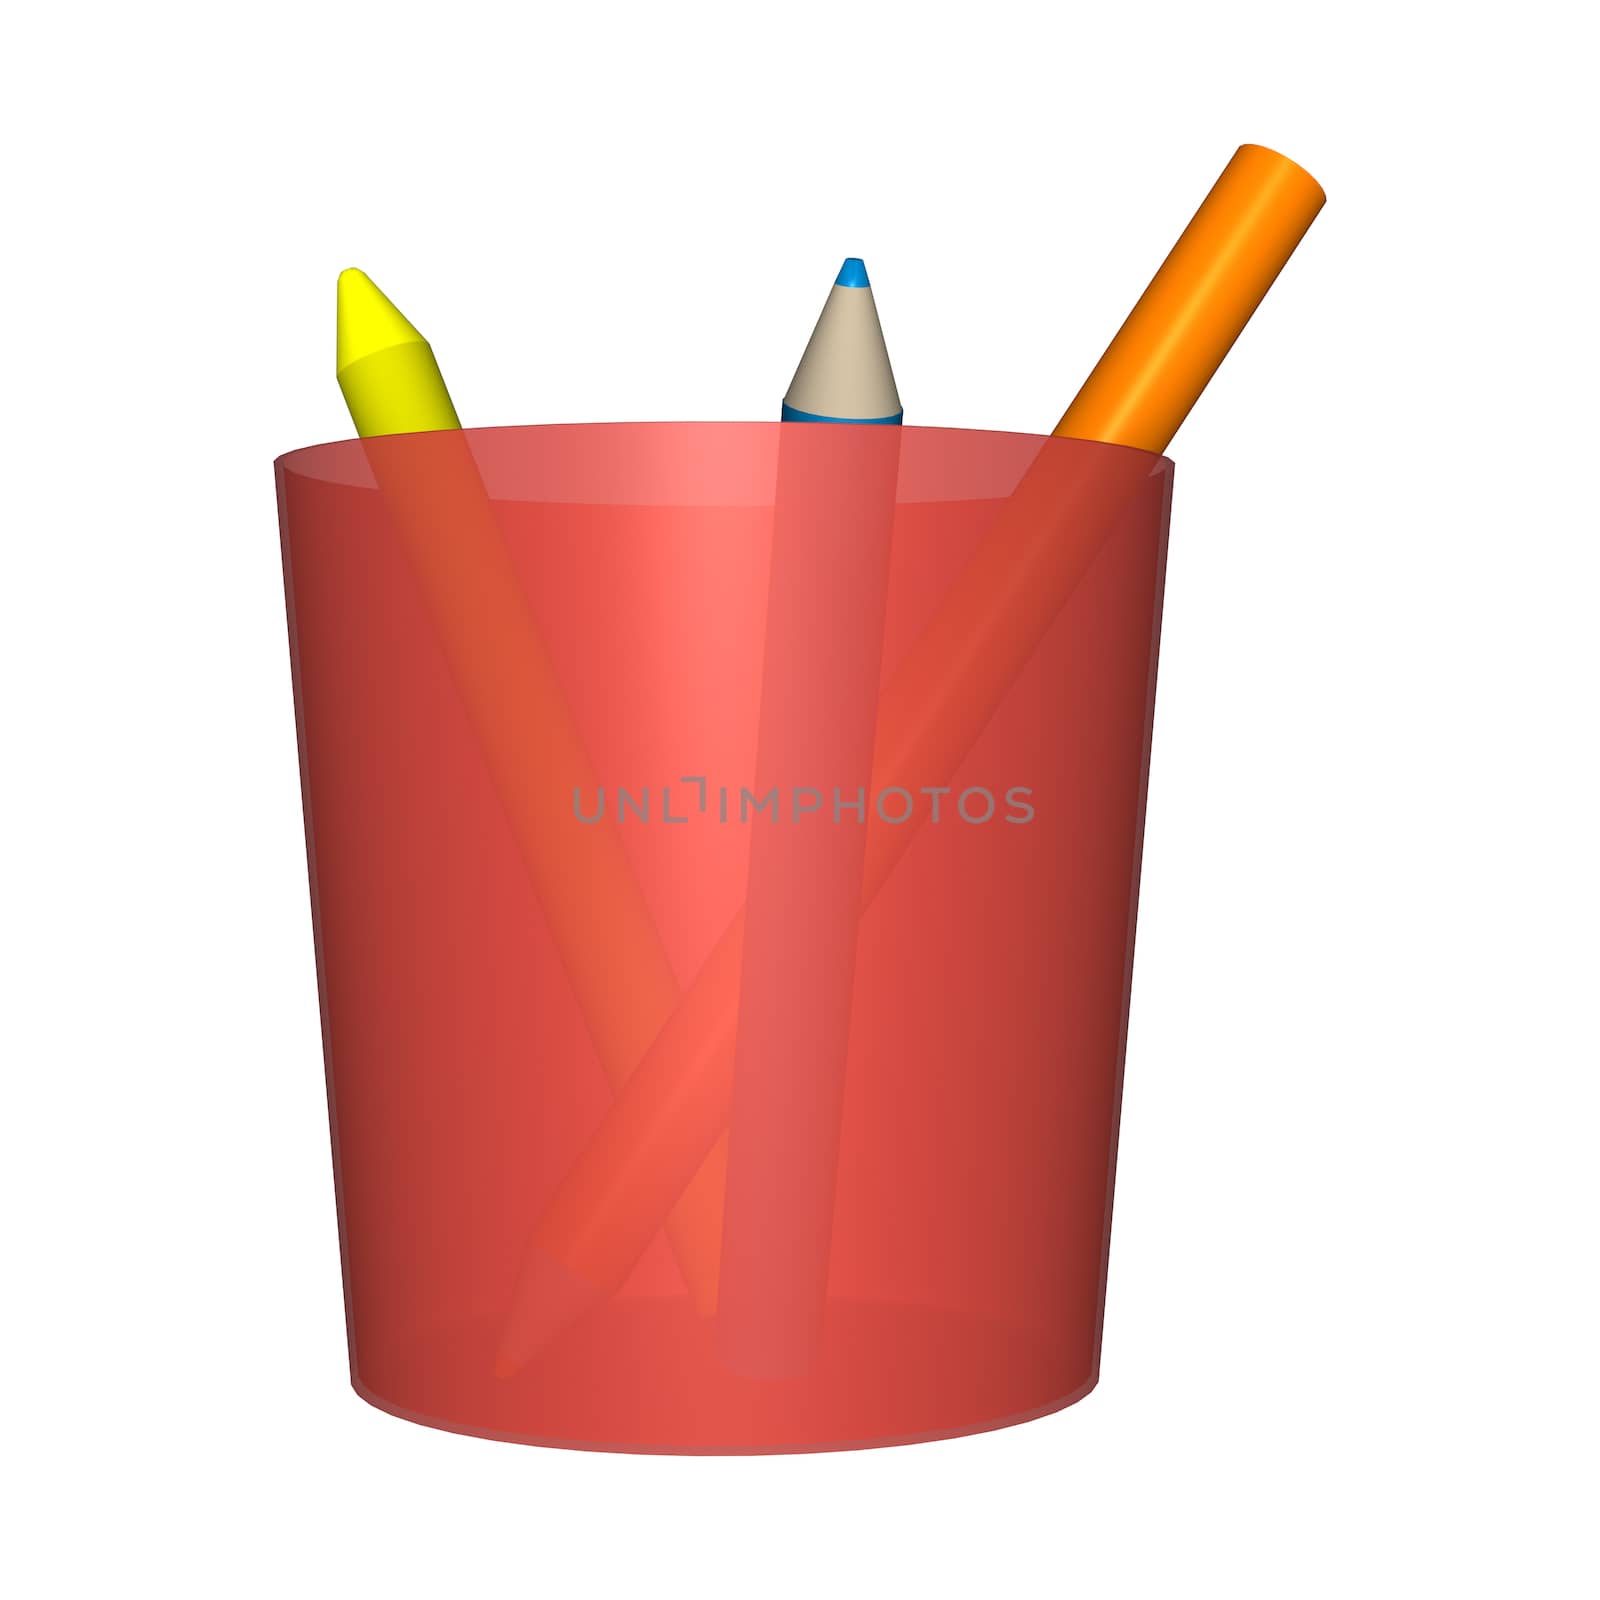 3D digital render of a red pencil jar with pencils isolated on white background